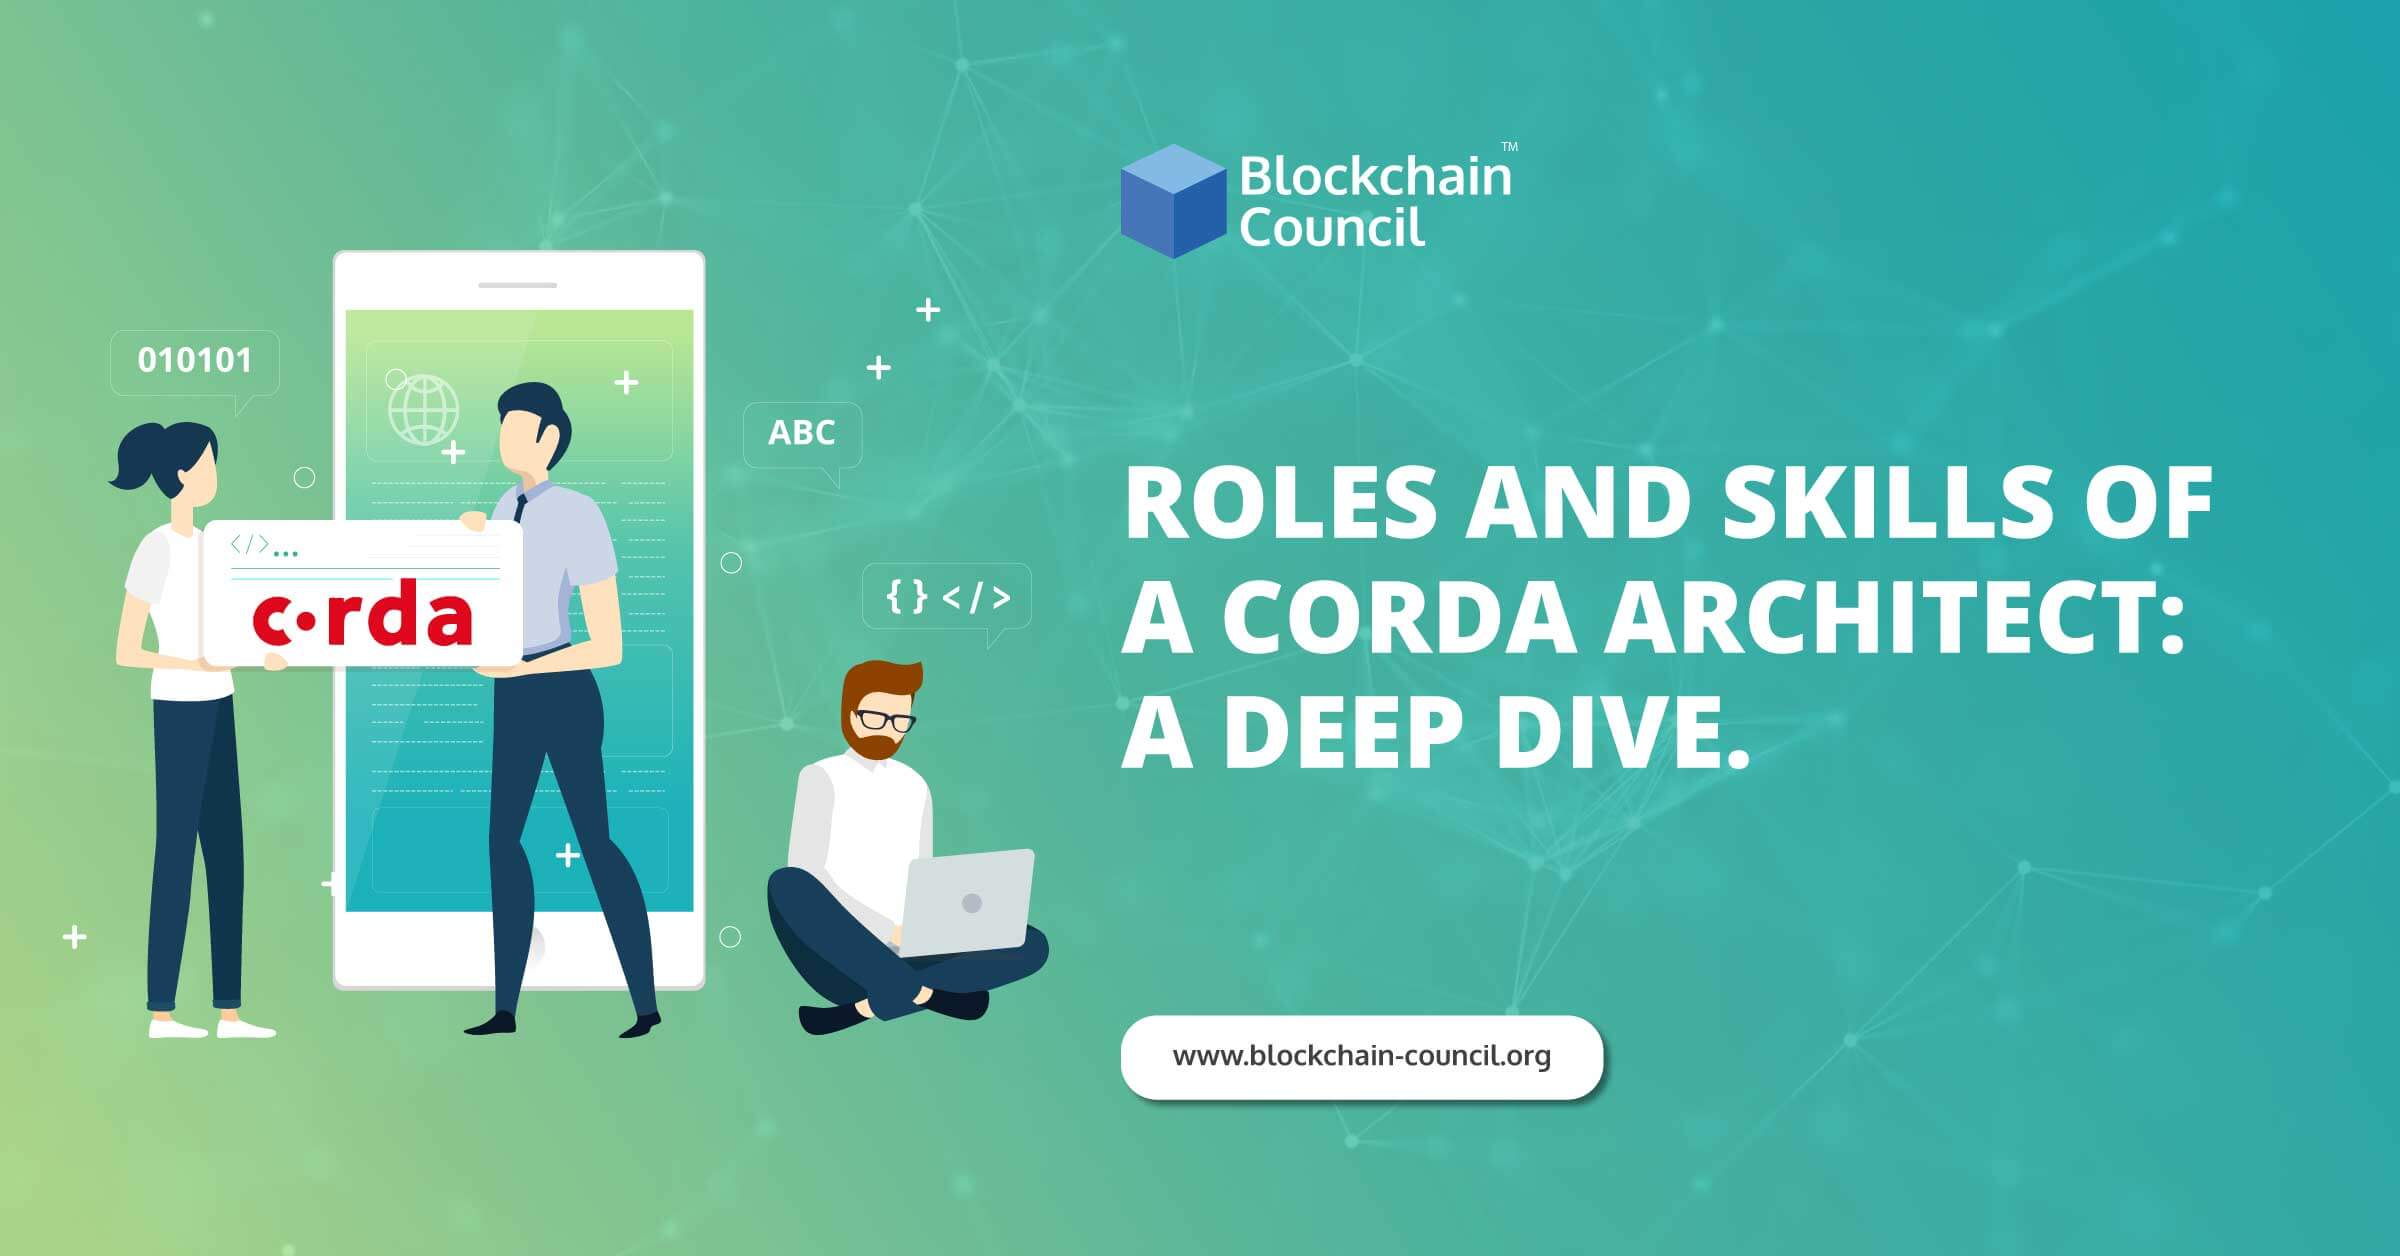 Roles And Skills of a Corda Architect: A Deep Dive